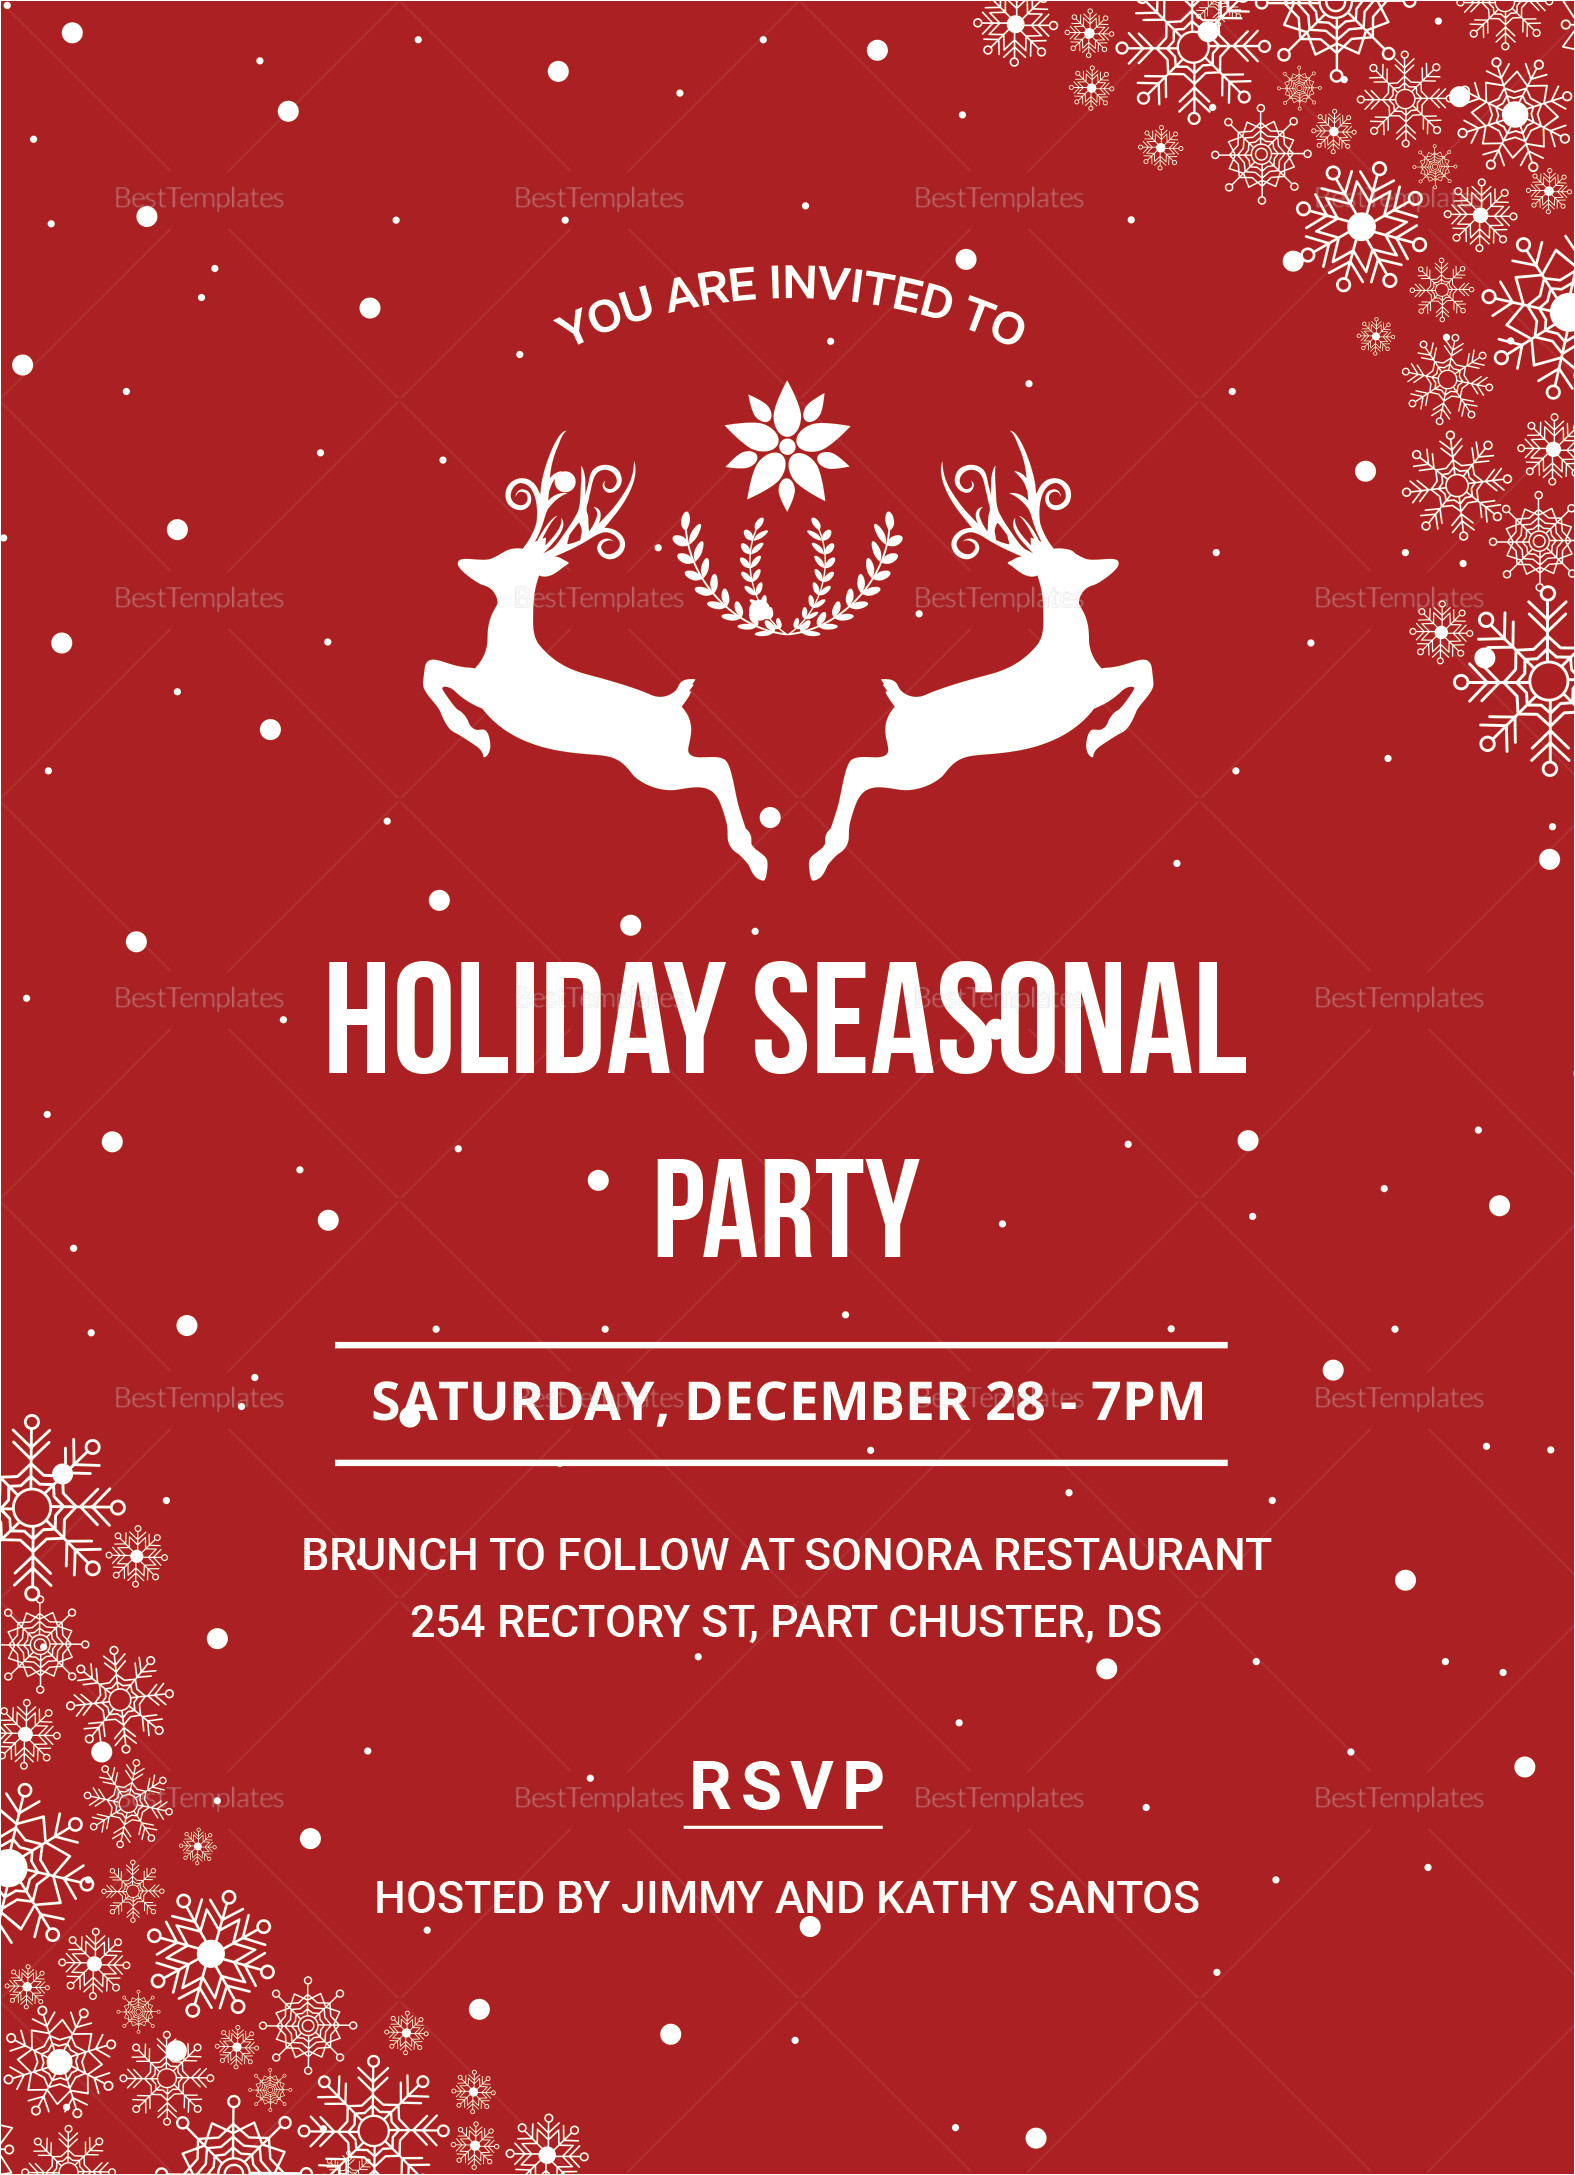 Work Party Invitation Template Festive Holiday Party Invitation Design Template In Psd